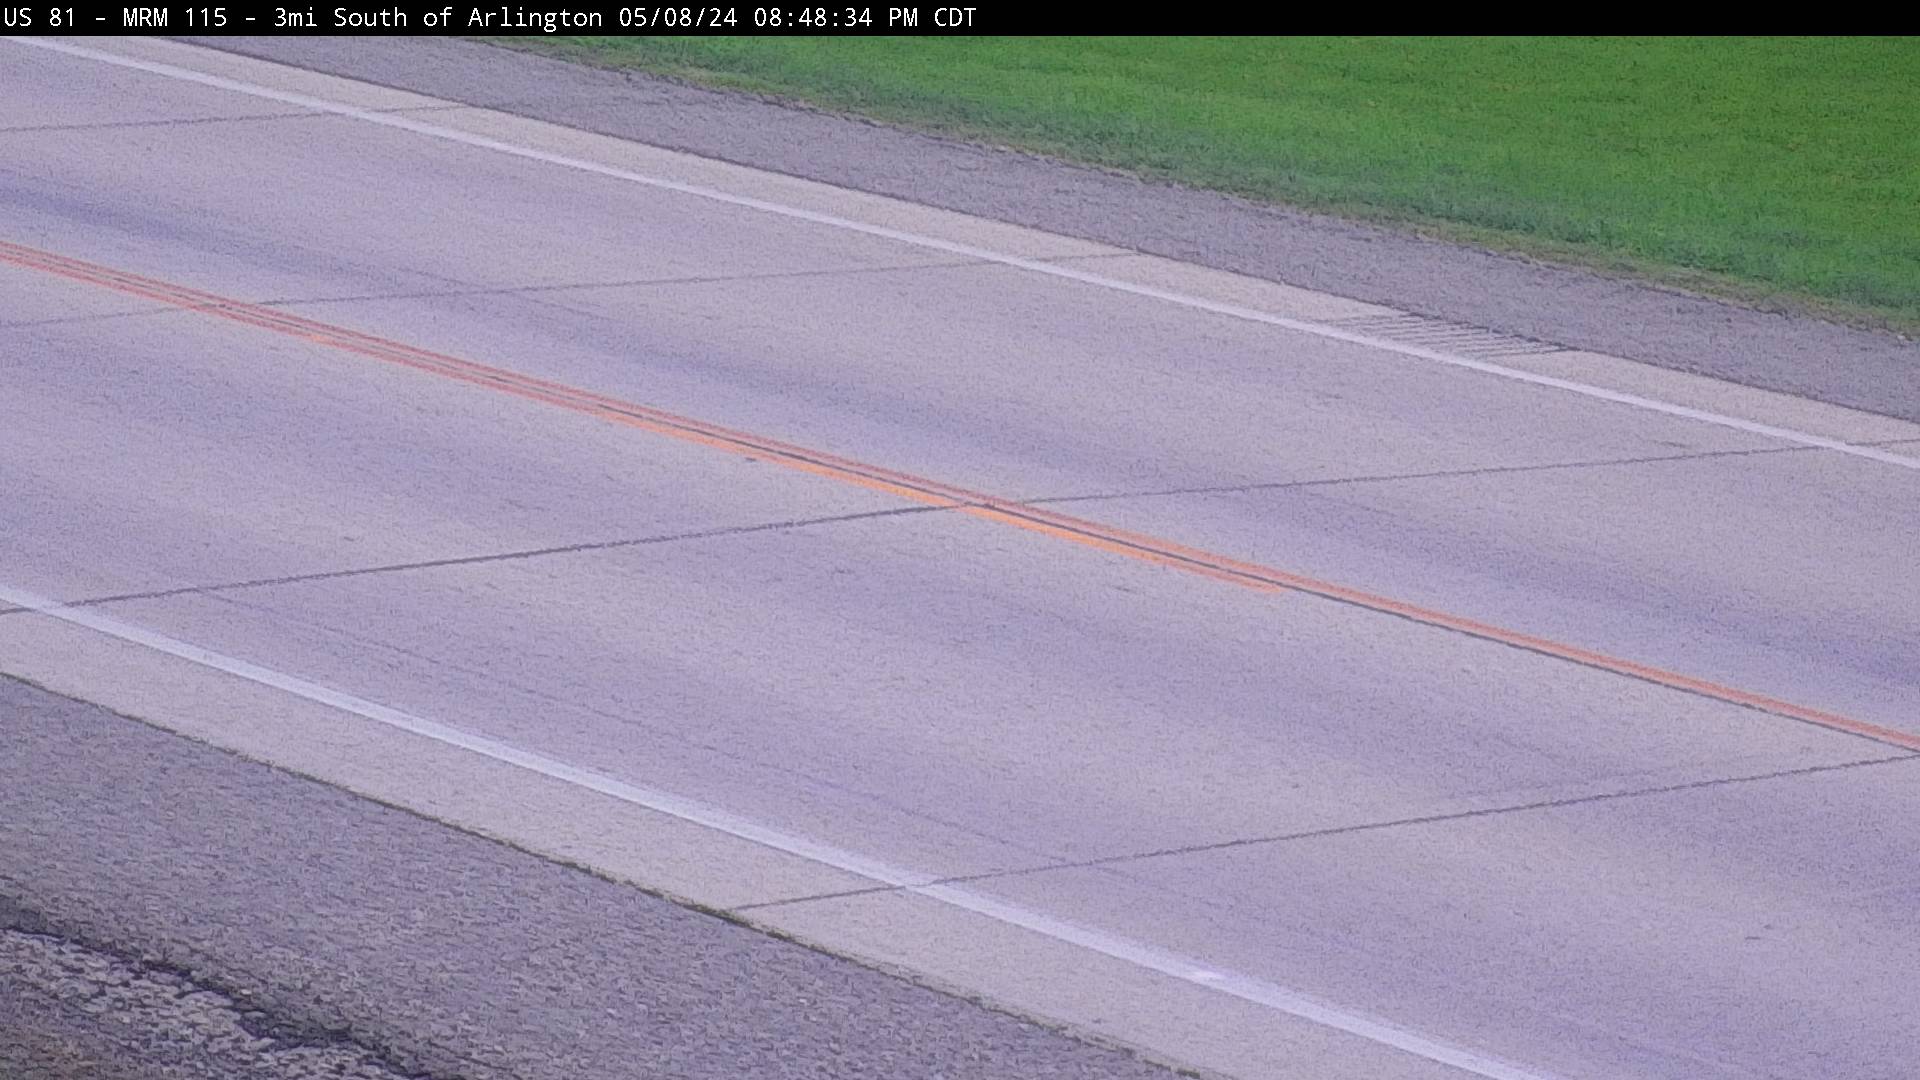 Traffic Cam 3 miles south of town along US-81 @ MP 115 - East Player